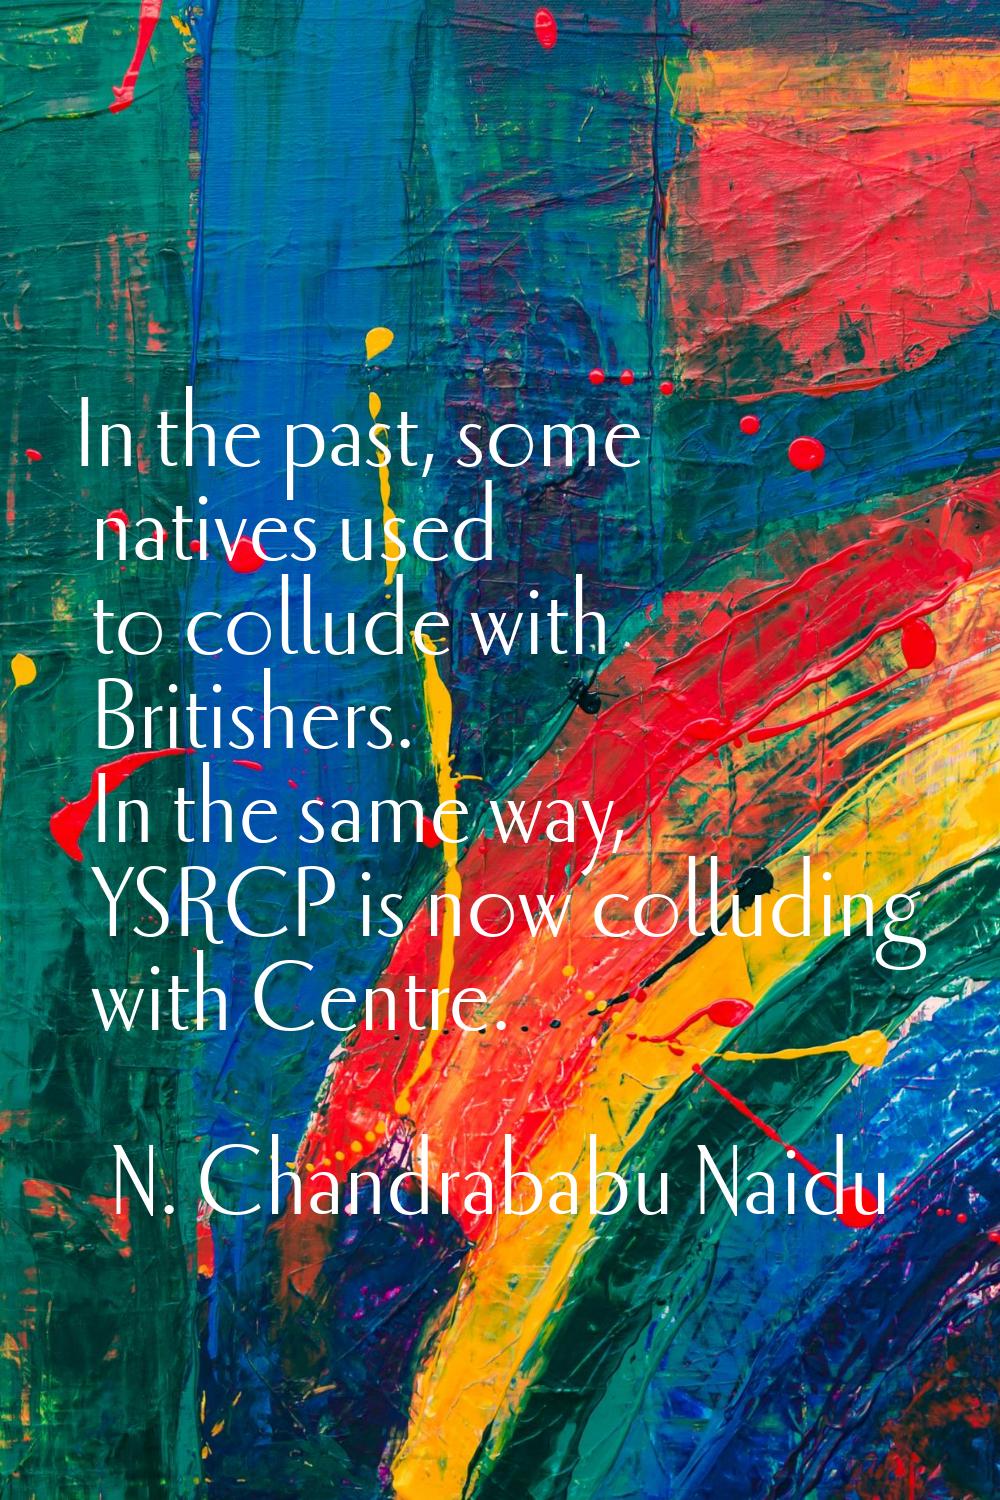 In the past, some natives used to collude with Britishers. In the same way, YSRCP is now colluding 